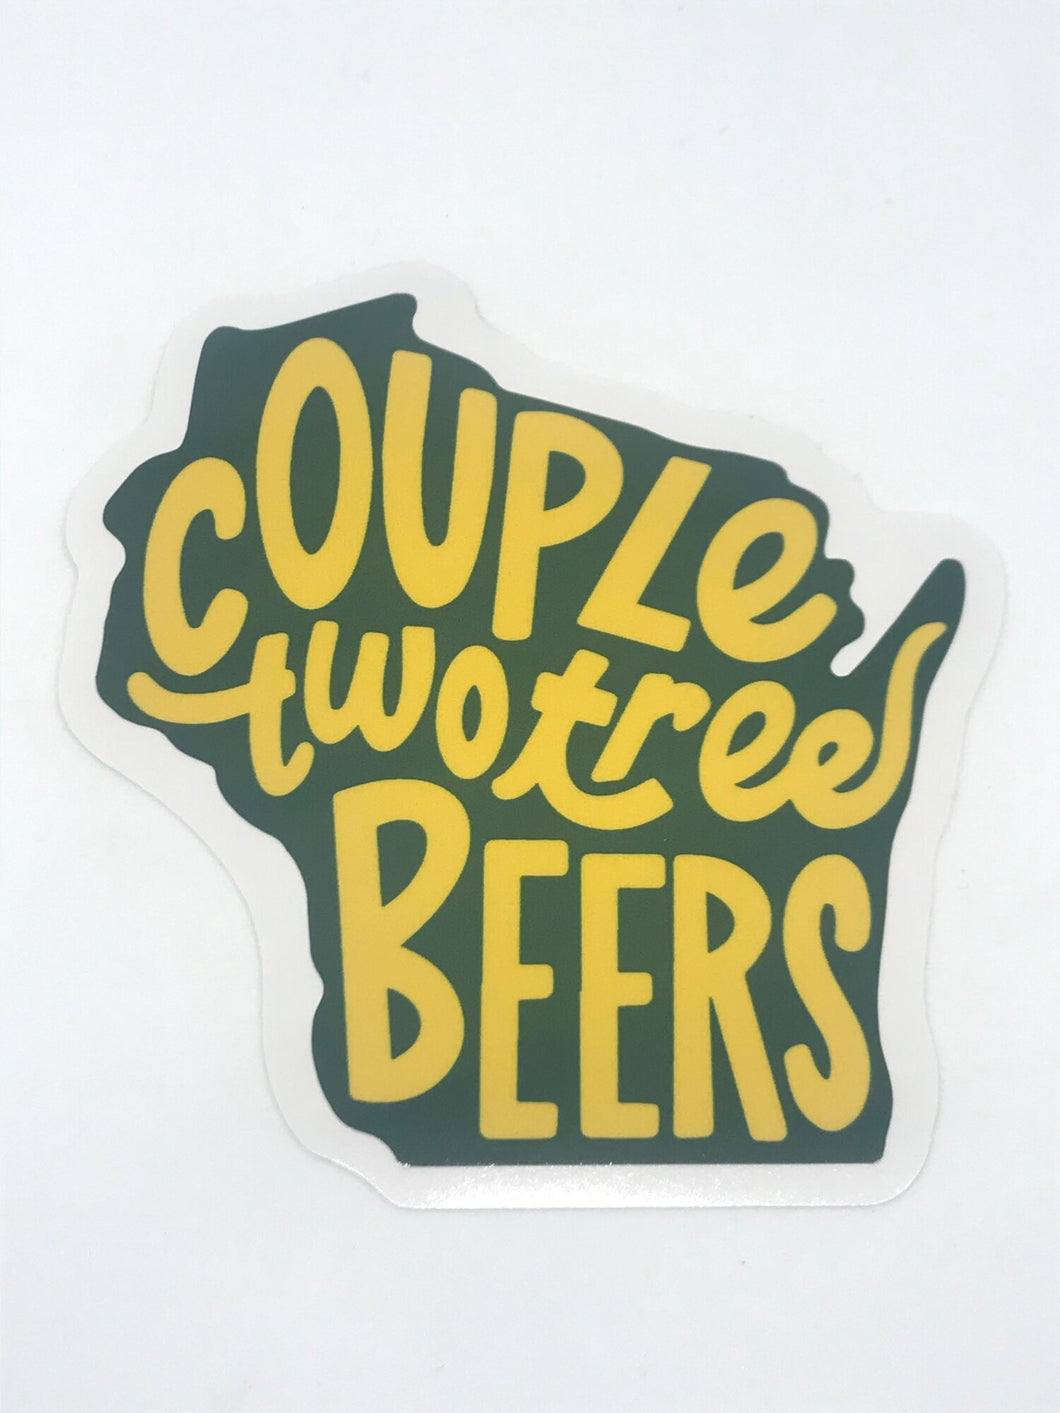 Flags Over Wisconsin - Couple Two Tree Beers Sticker